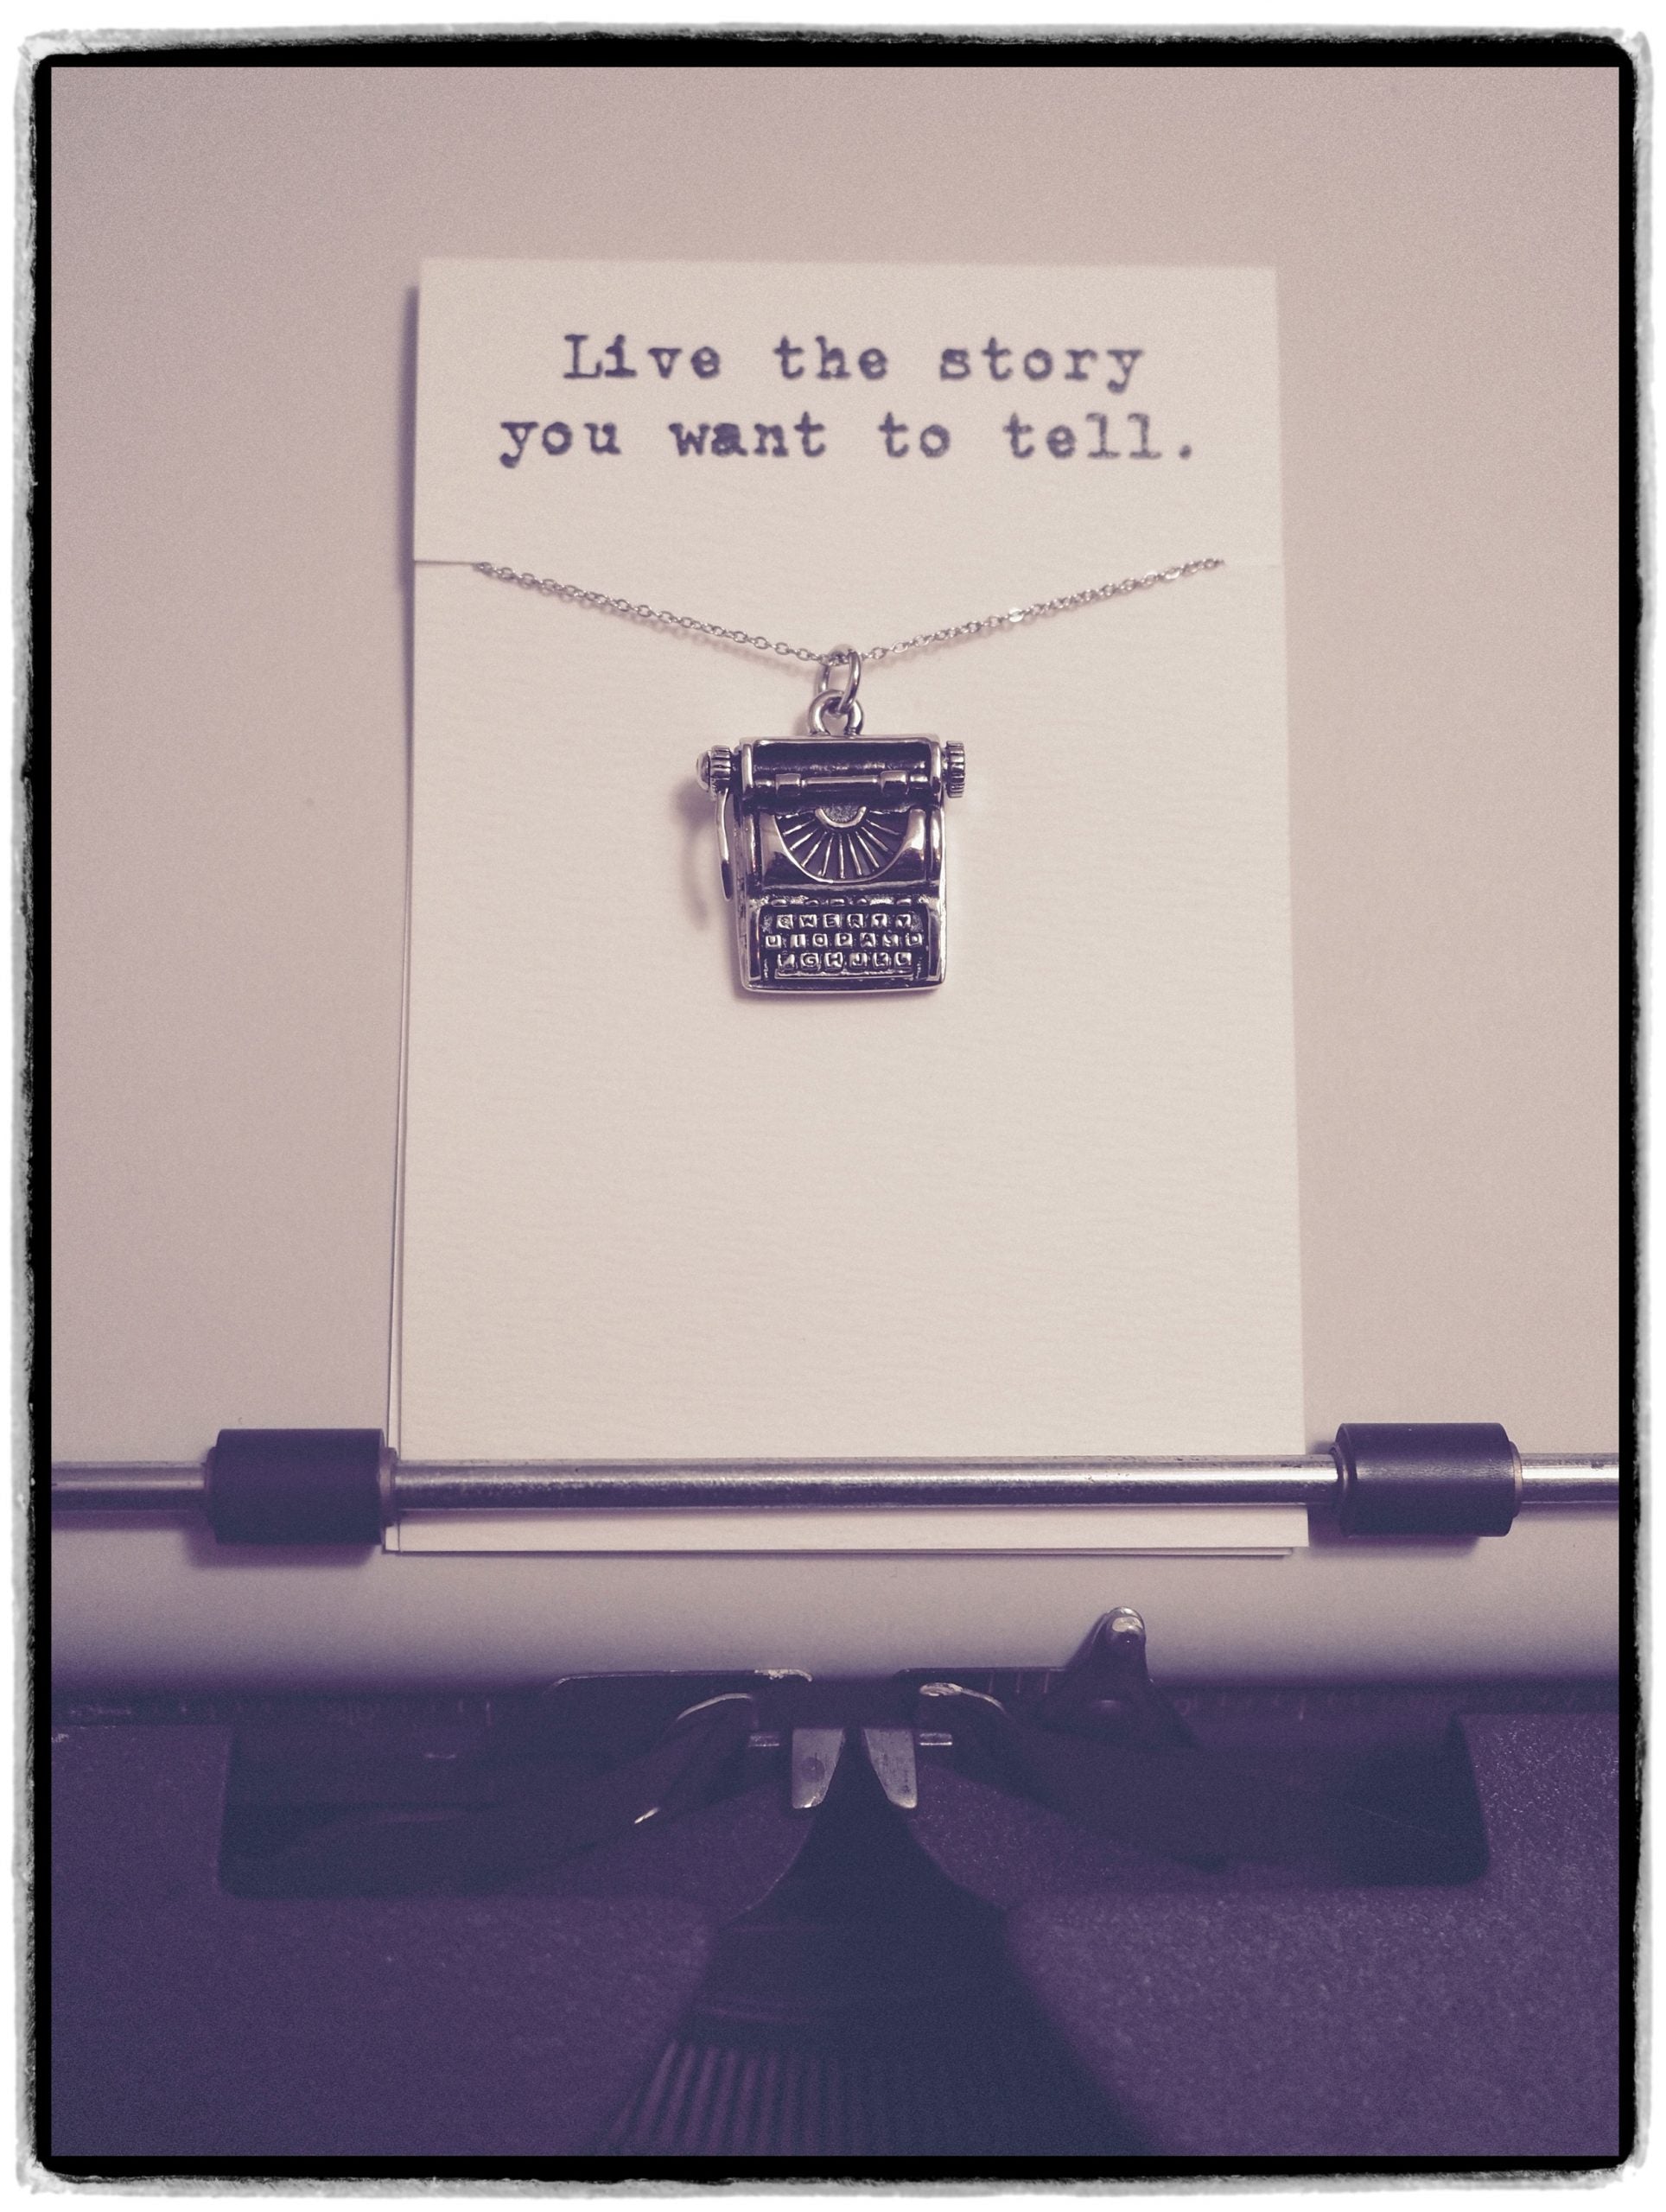 Quinnlyn - Typewriter - Necklace - Pendant